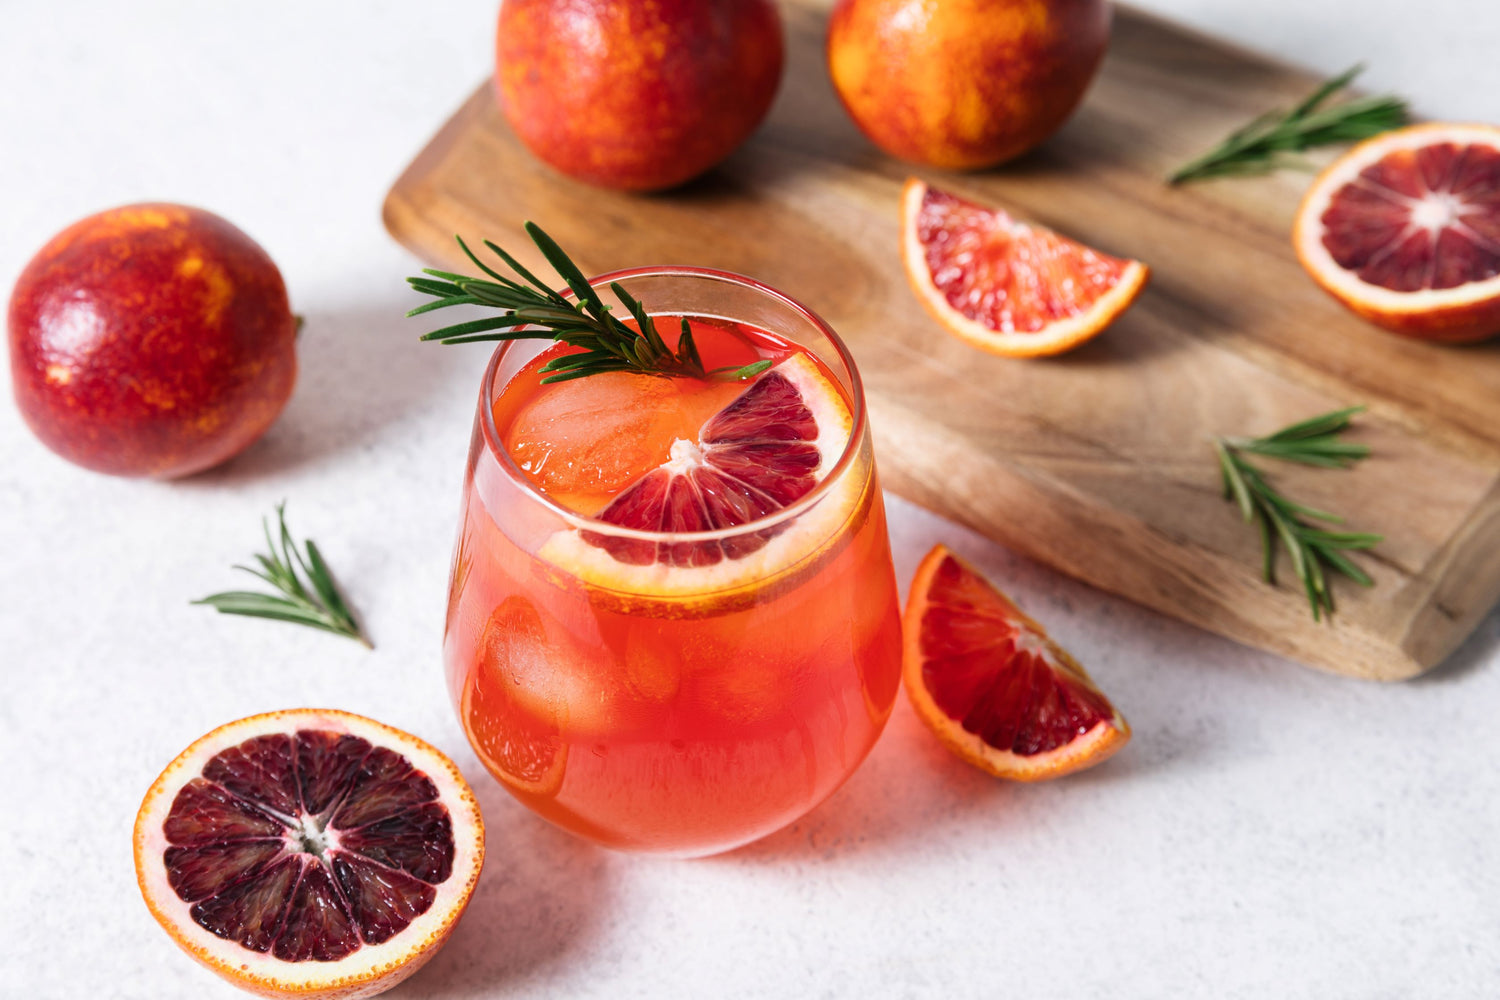 Celebrating spring with a Nine Tines Blood Orange and Honey Sour - Seasonal, simple and delicious!